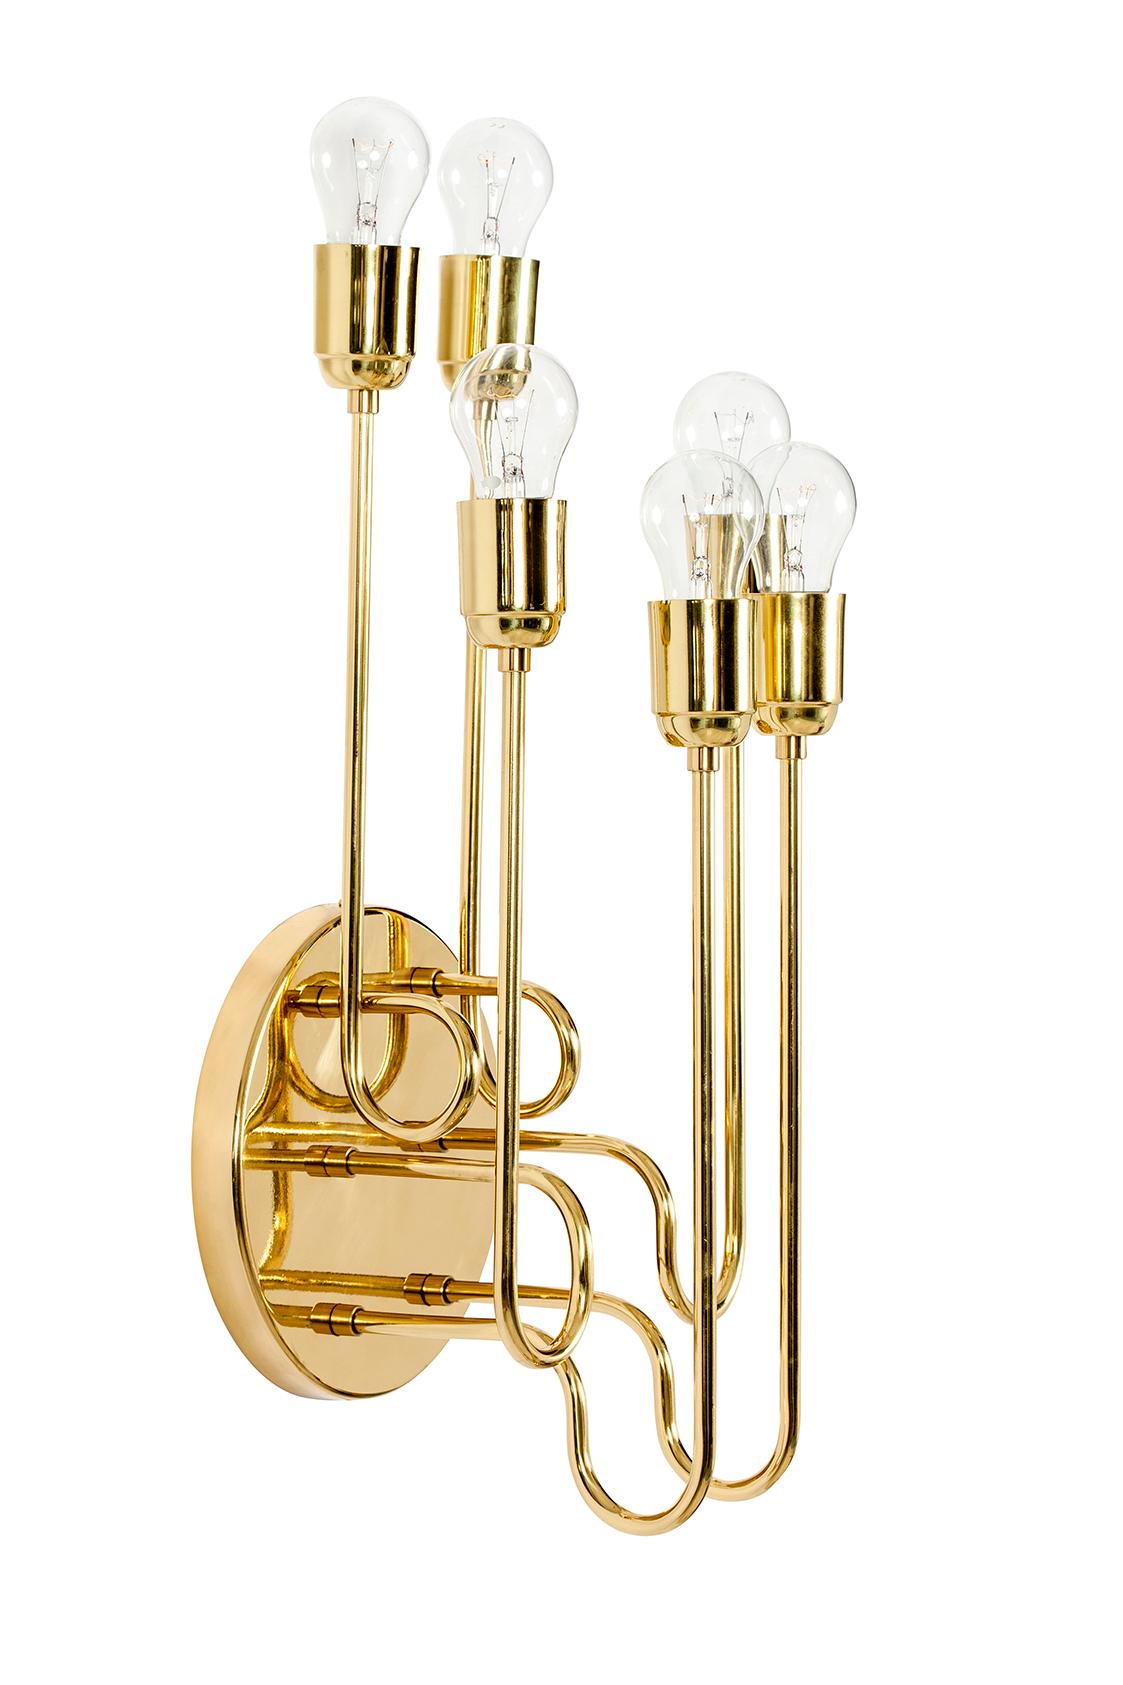 Kontra’s interpretation of the wall lamp consists brass/chrome/rose gold body and provides an elegant illumination to spaces. Wall Lamp, Sconce.